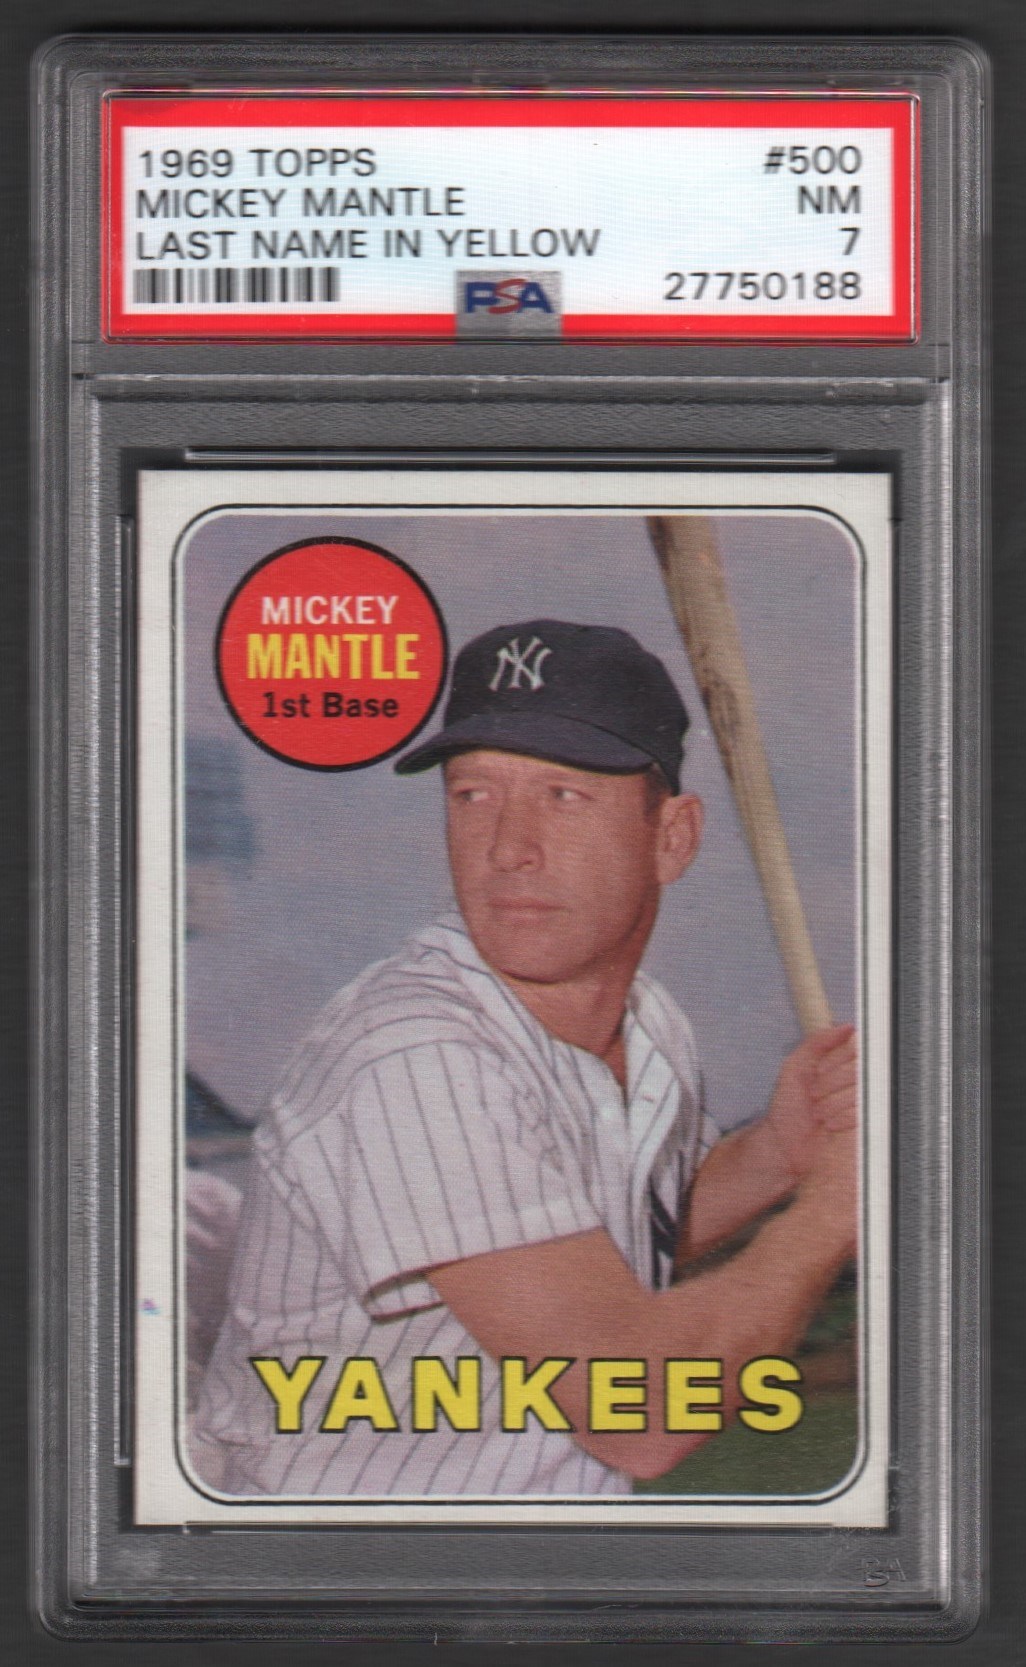 - 1969 Topps #500 Mickey Mantle - PSA NM 7